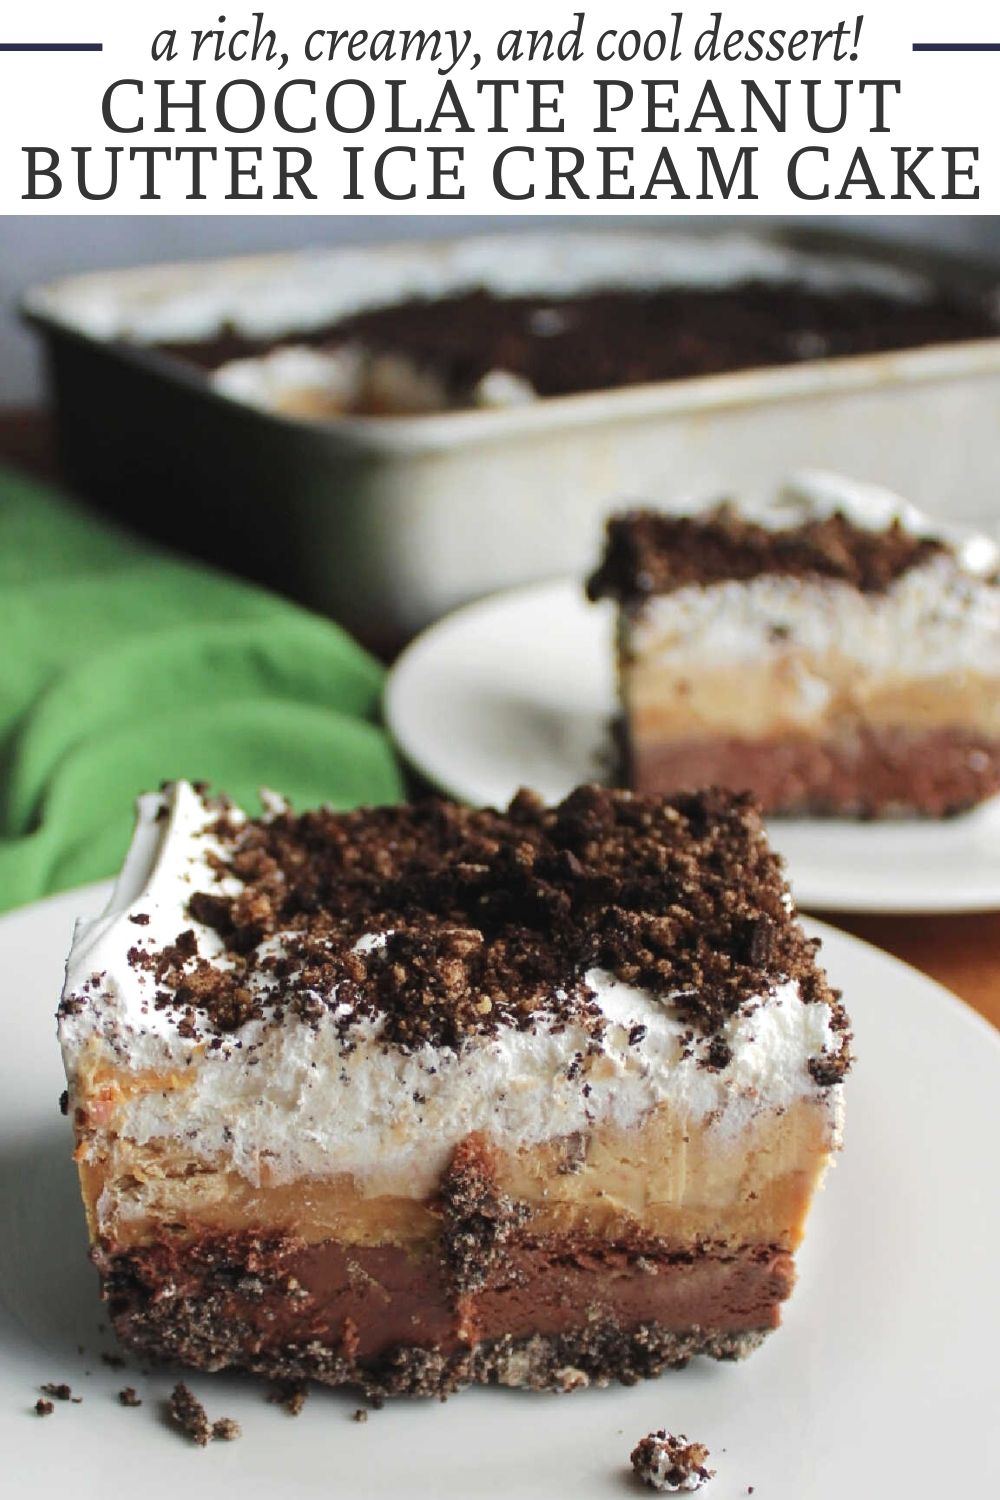 If you are in the mood for a decadent, creamy, and cold treat, this peanut butter chocolate ice cream cake is just the thing for you. It is layers of ice cream and peanut butter on top of a cookie crumb crust. It is perfect for special occasions that call for a fabulous ice cream treat.